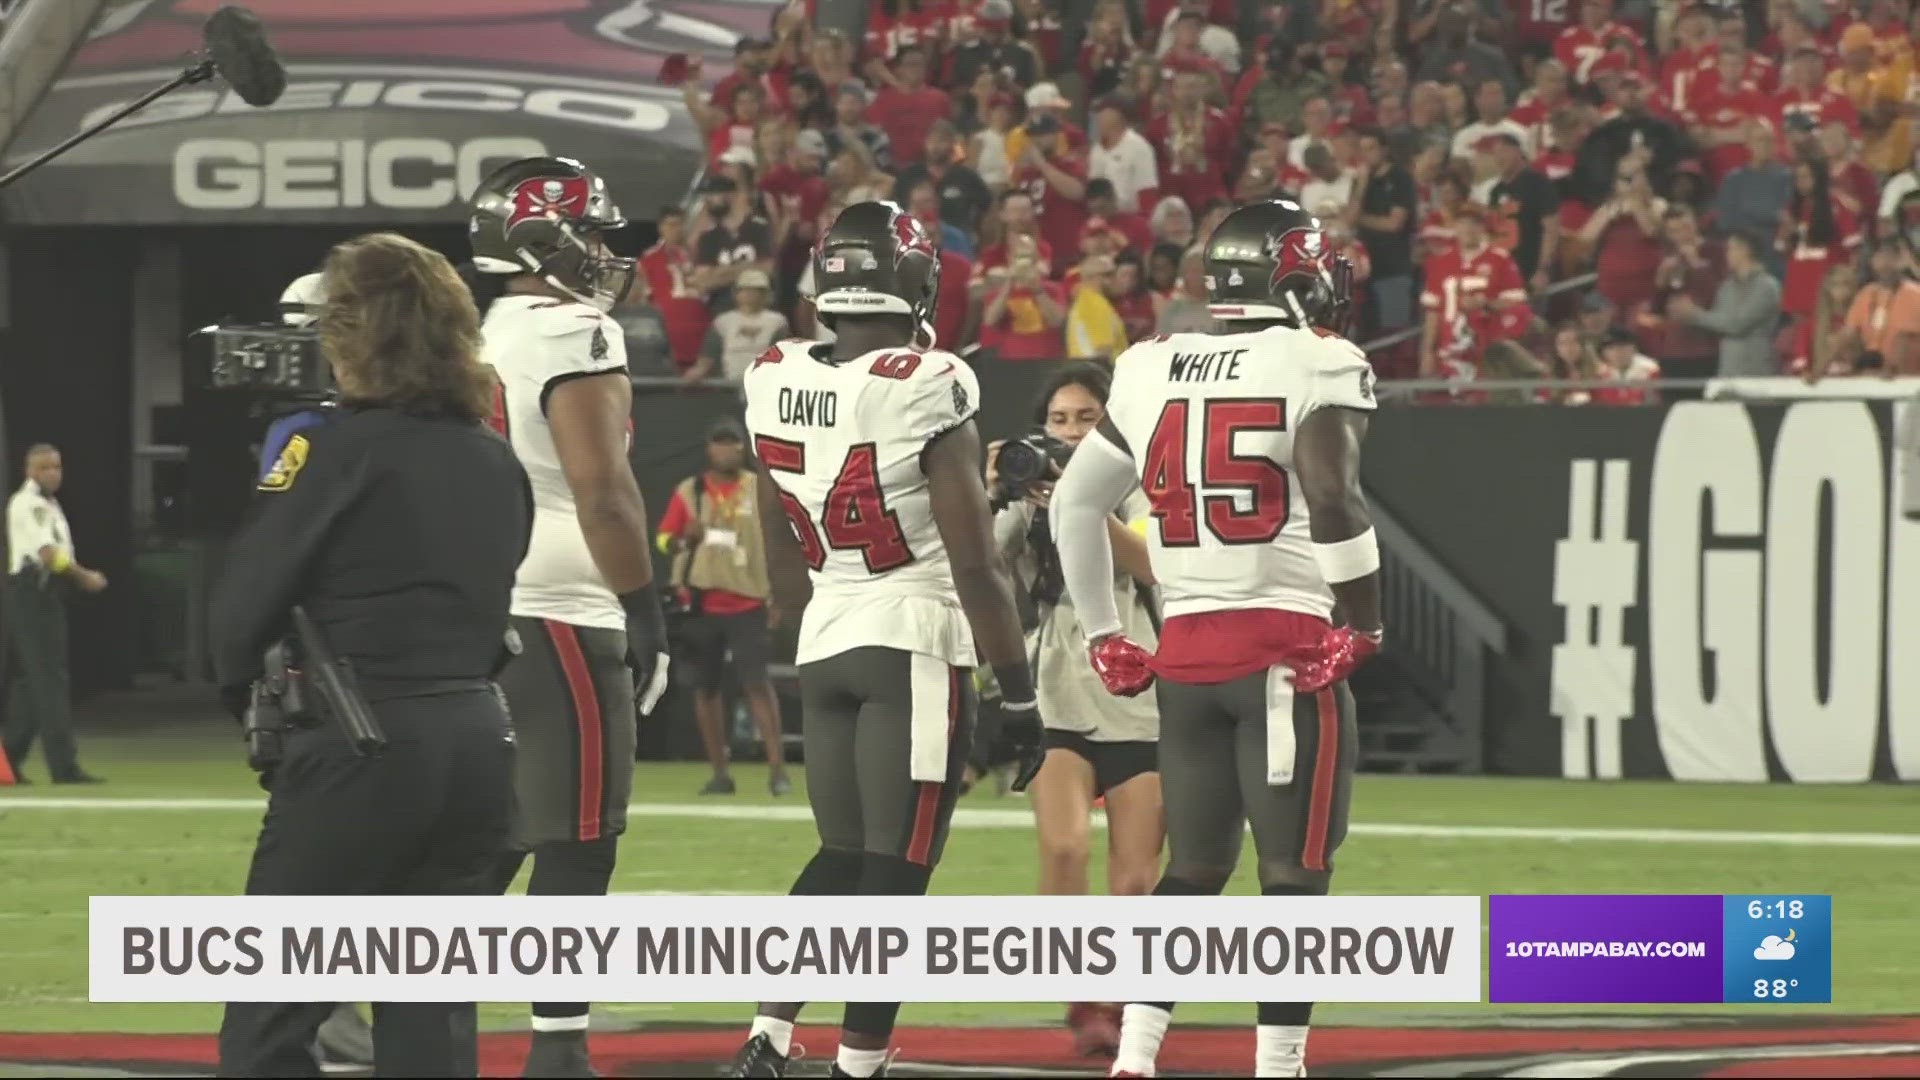 Buccaneers minicamp gets underway this week: What to expect